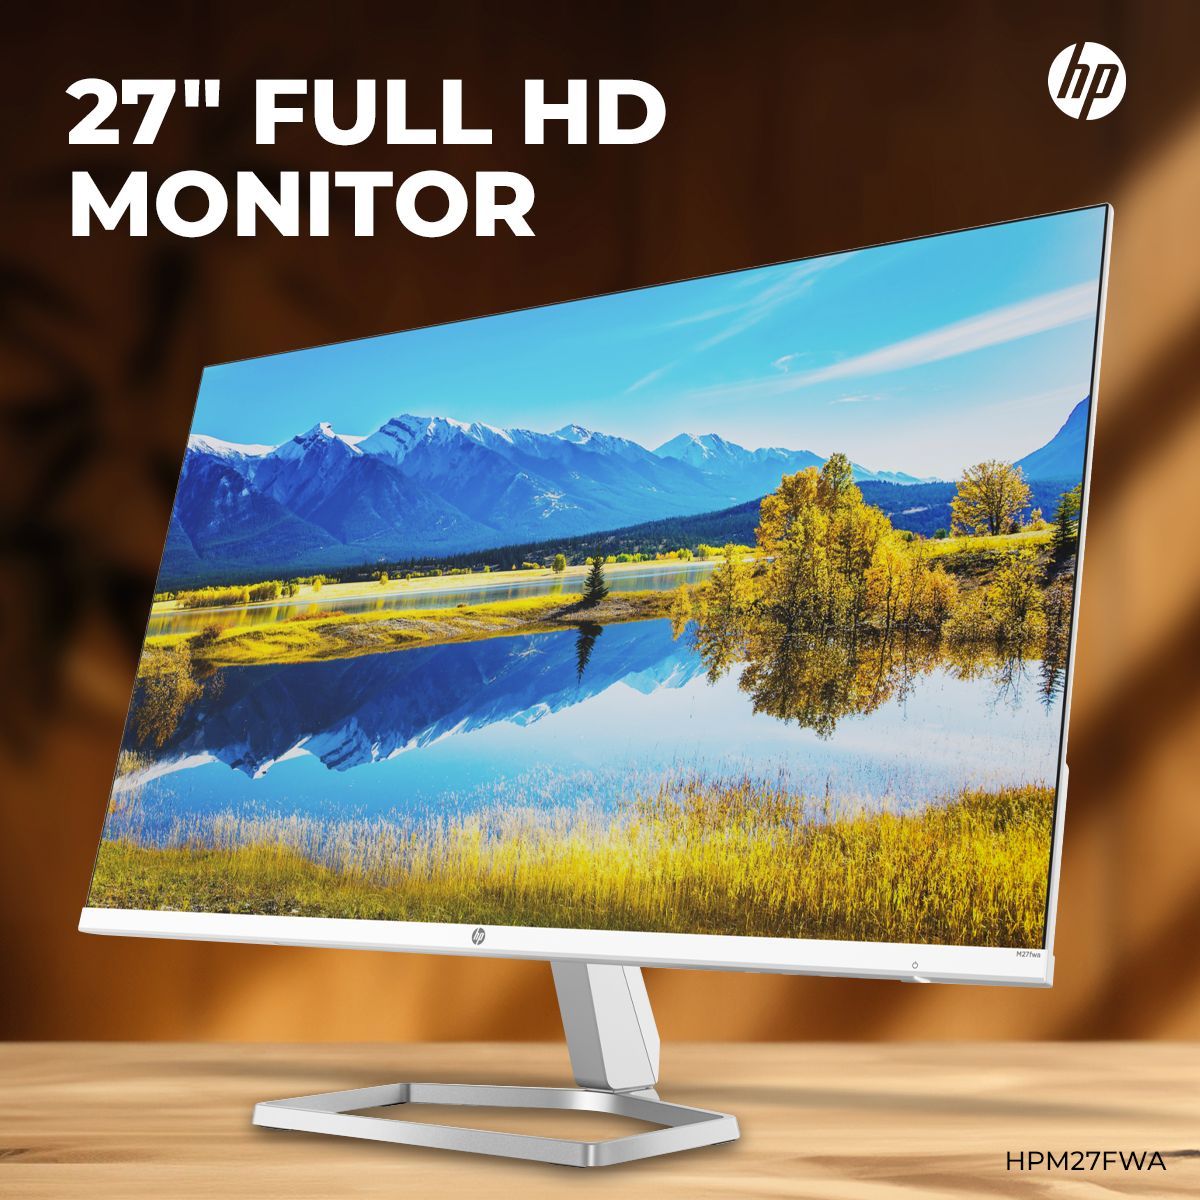 Lose yourself in this picture-perfect ultra-slim display buff.ly/4daWfSb #HP